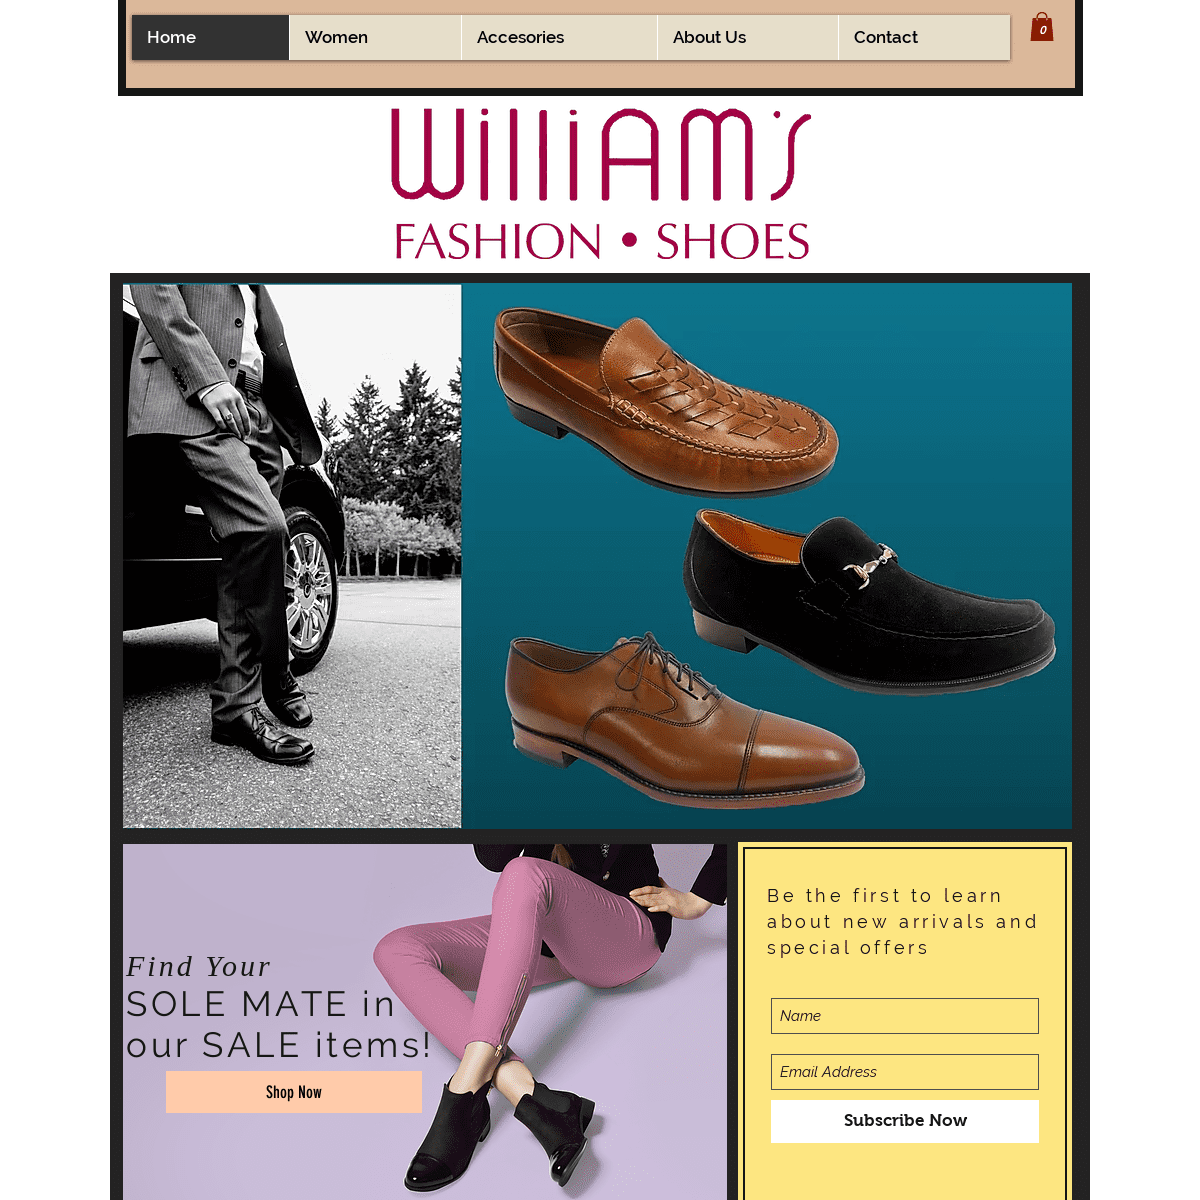 A complete backup of williams-shoes.com